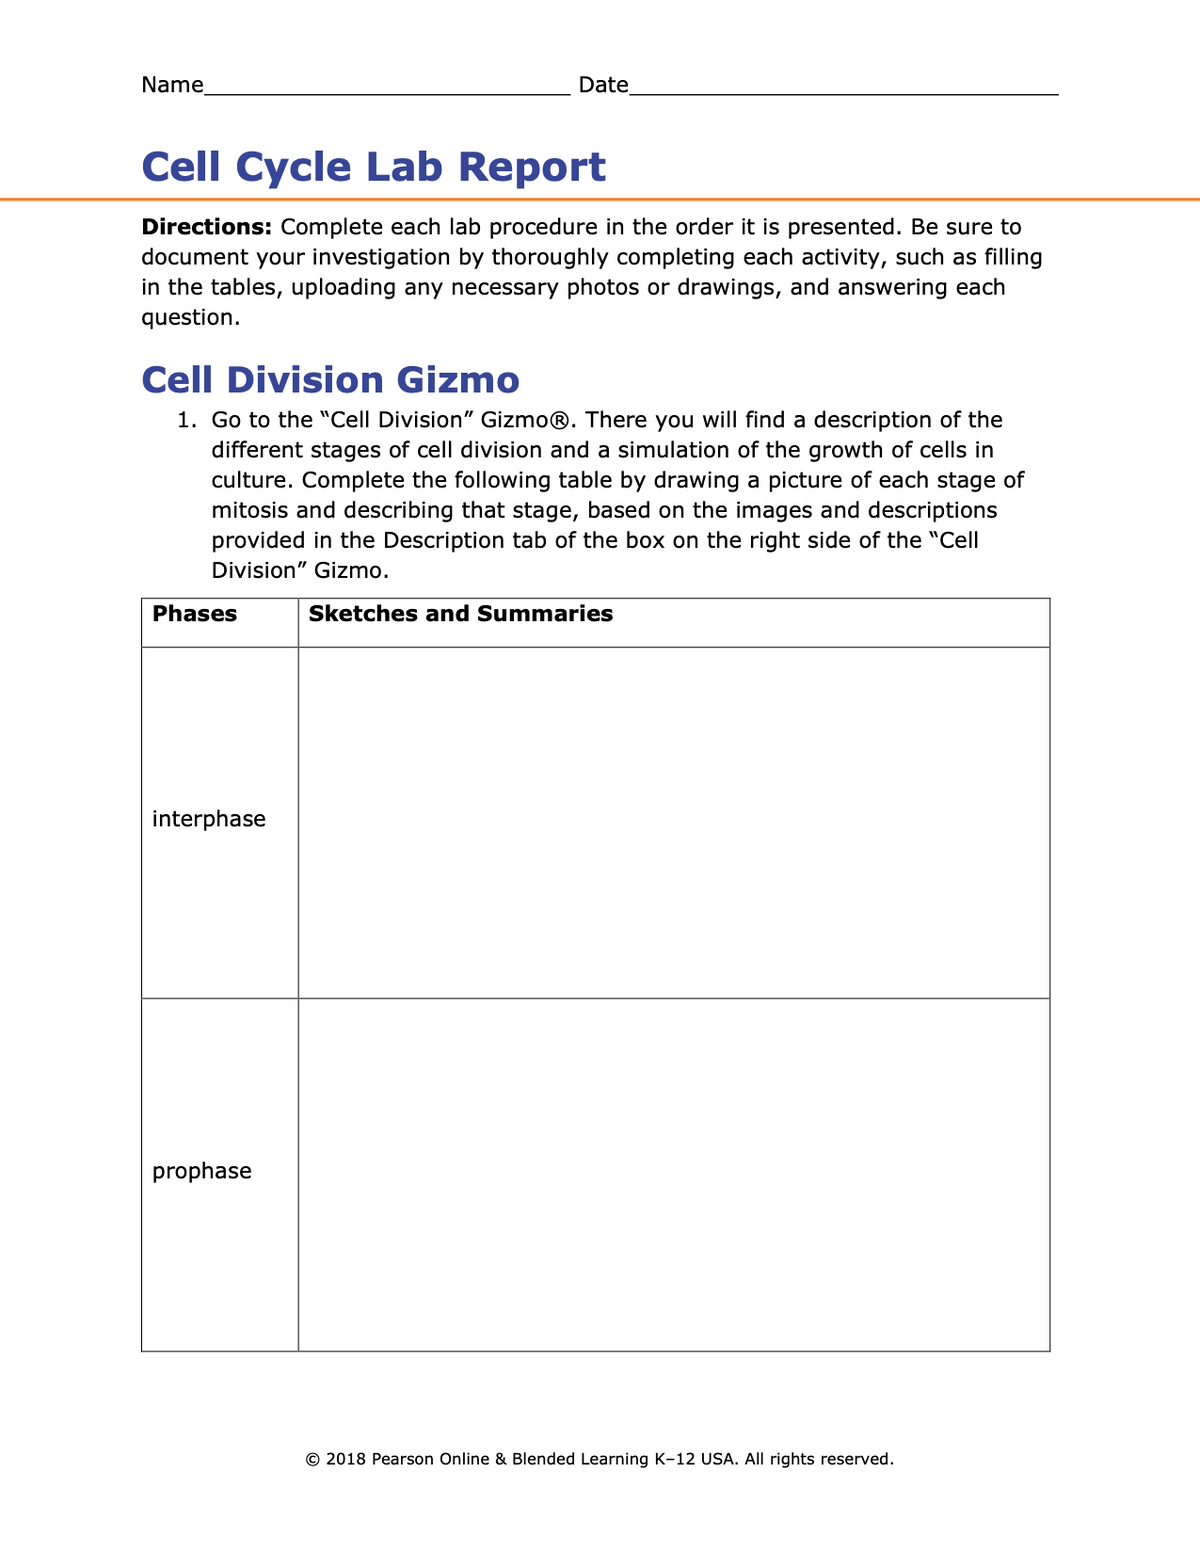 Name
Date
Cell Cycle Lab Report
Directions: Complete each lab procedure in the order it is presented. Be sure to
document your investigation by thoroughly completing each activity, such as filling
in the tables, uploading any necessary photos or drawings, and answering each
question.
Cell Division Gizmo
1. Go to the "Cell Division" Gizmo®. There you will find a description of the
different stages of cell division and a simulation of the growth of cells in
culture. Complete the following table by drawing a picture of each stage of
mitosis and describing that stage, based on the images and descriptions
provided in the Description tab of the box on the right side of the "Cell
Division" Gizmo.
Phases
Sketches and Summaries
interphase
prophase
© 2018 Pearson Online & Blended Learning K-12 USA. All rights reserved.
